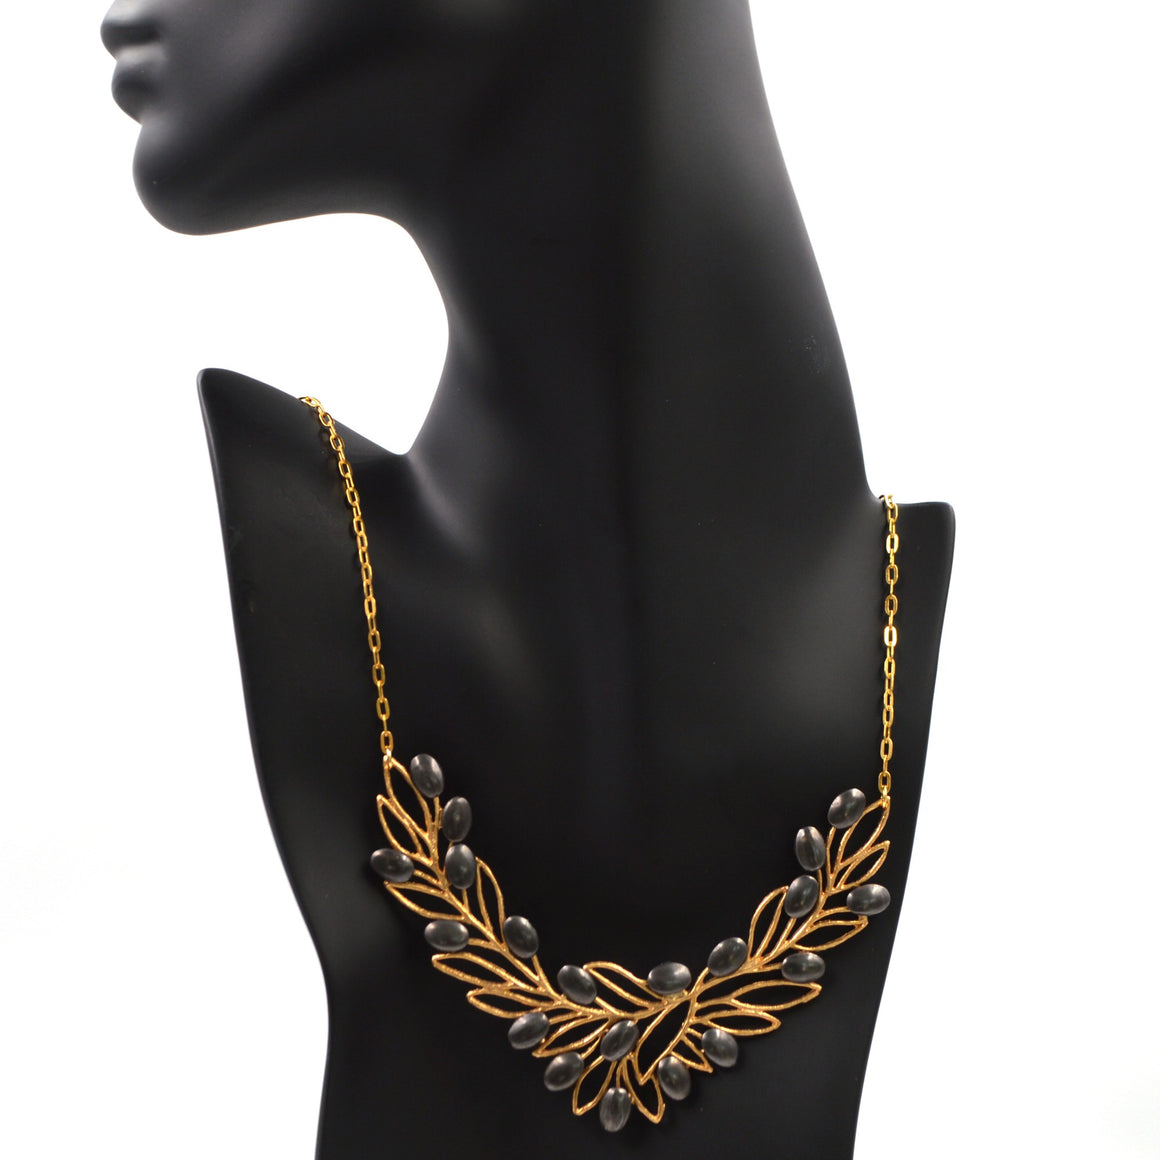 Olive Branch Olives and Leaves Collar Necklace - 24K Gold Plated